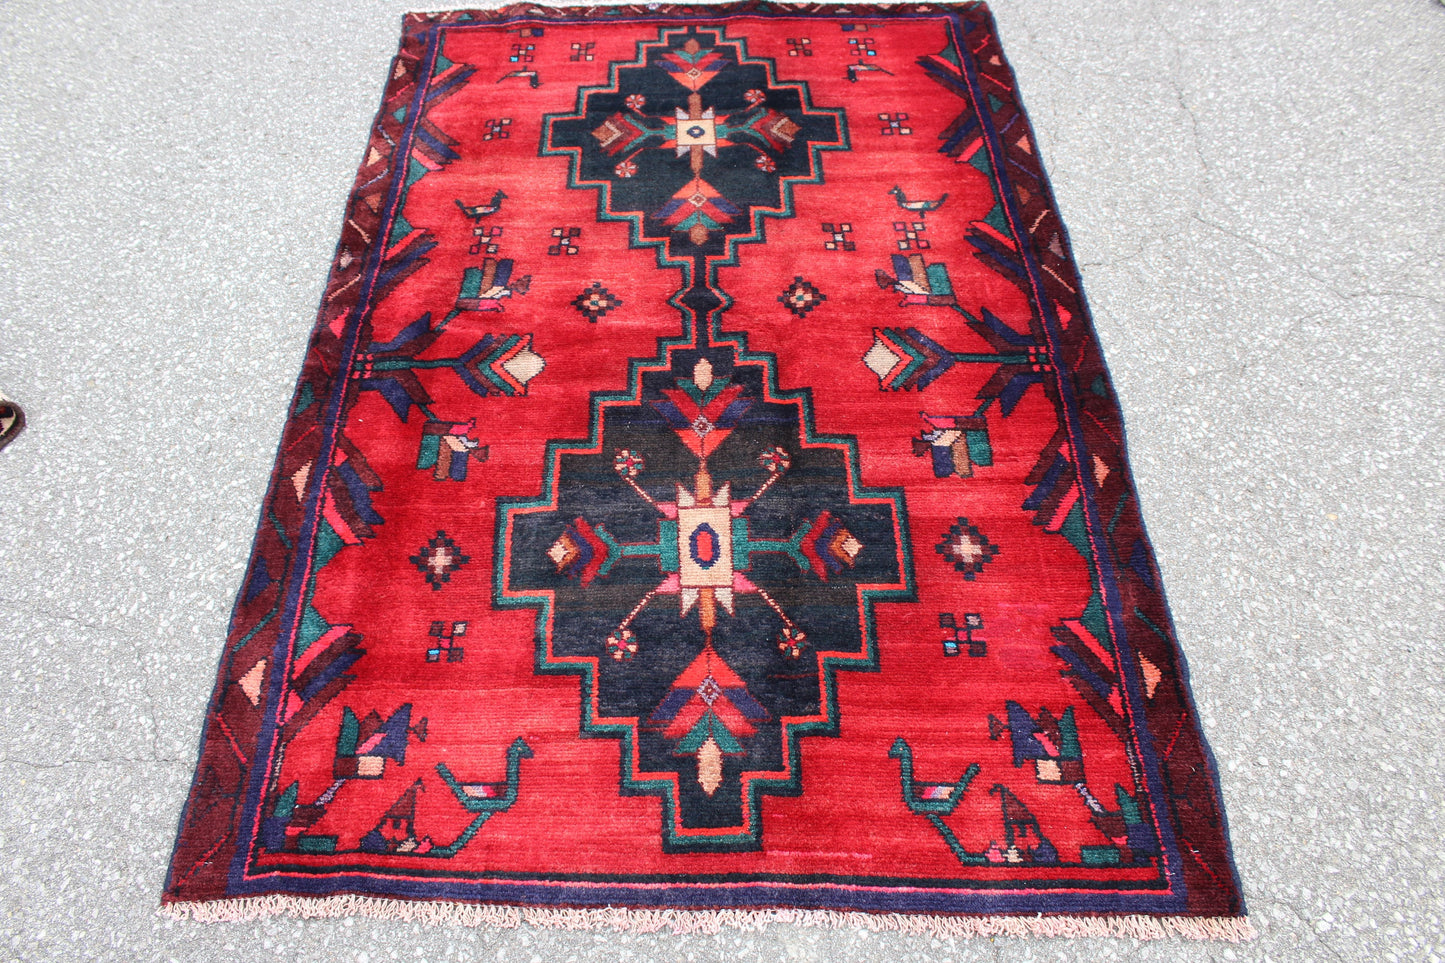 Bright Red 4x6 Rug with Navy Teal Tribal Floral Accents